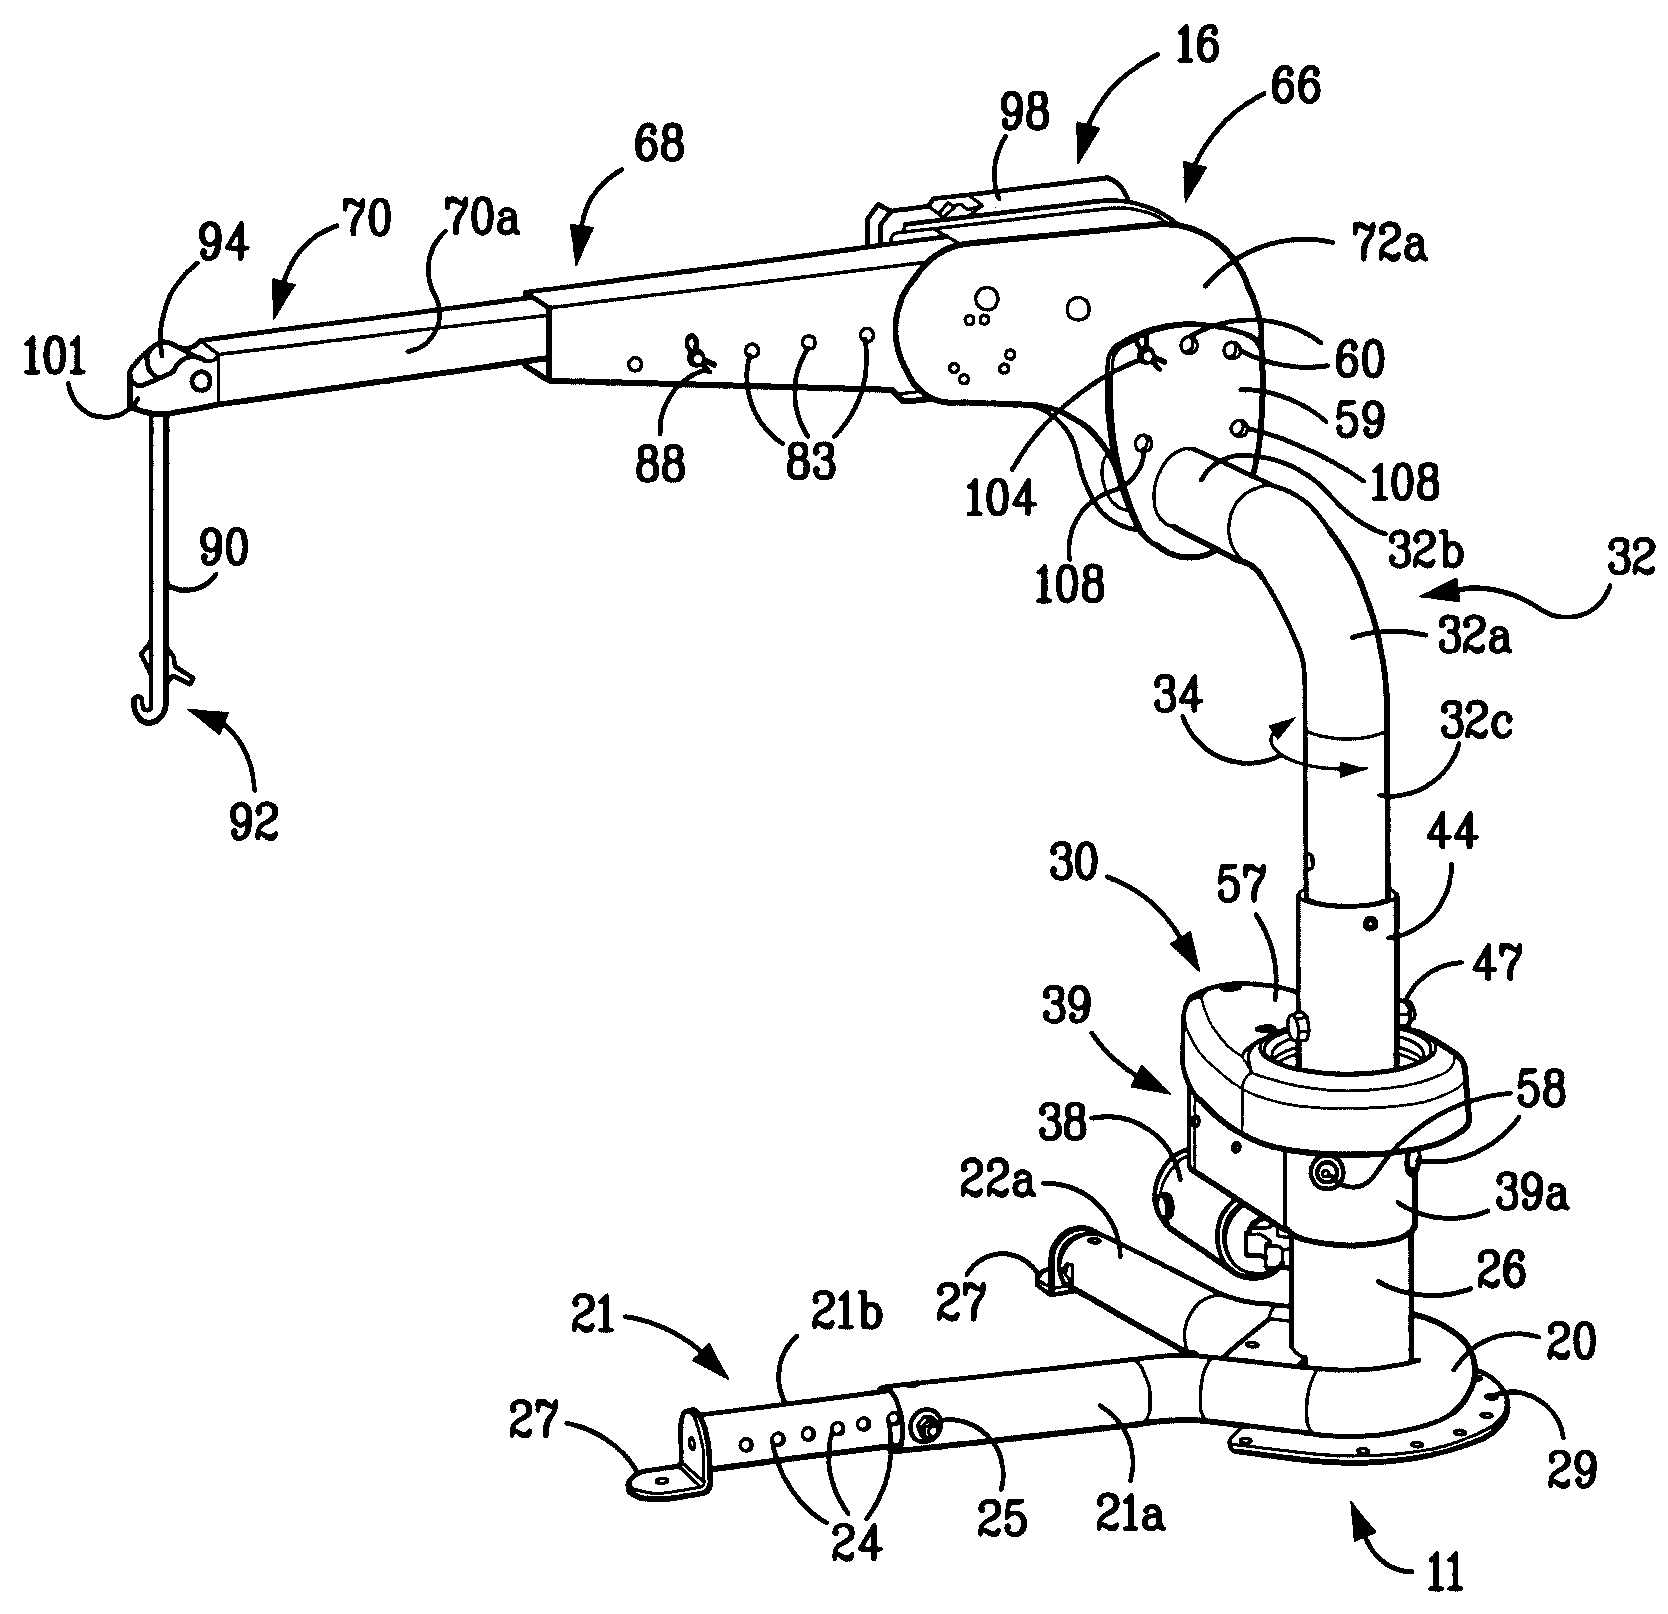 Lifting device for a personal-transportation vehicle